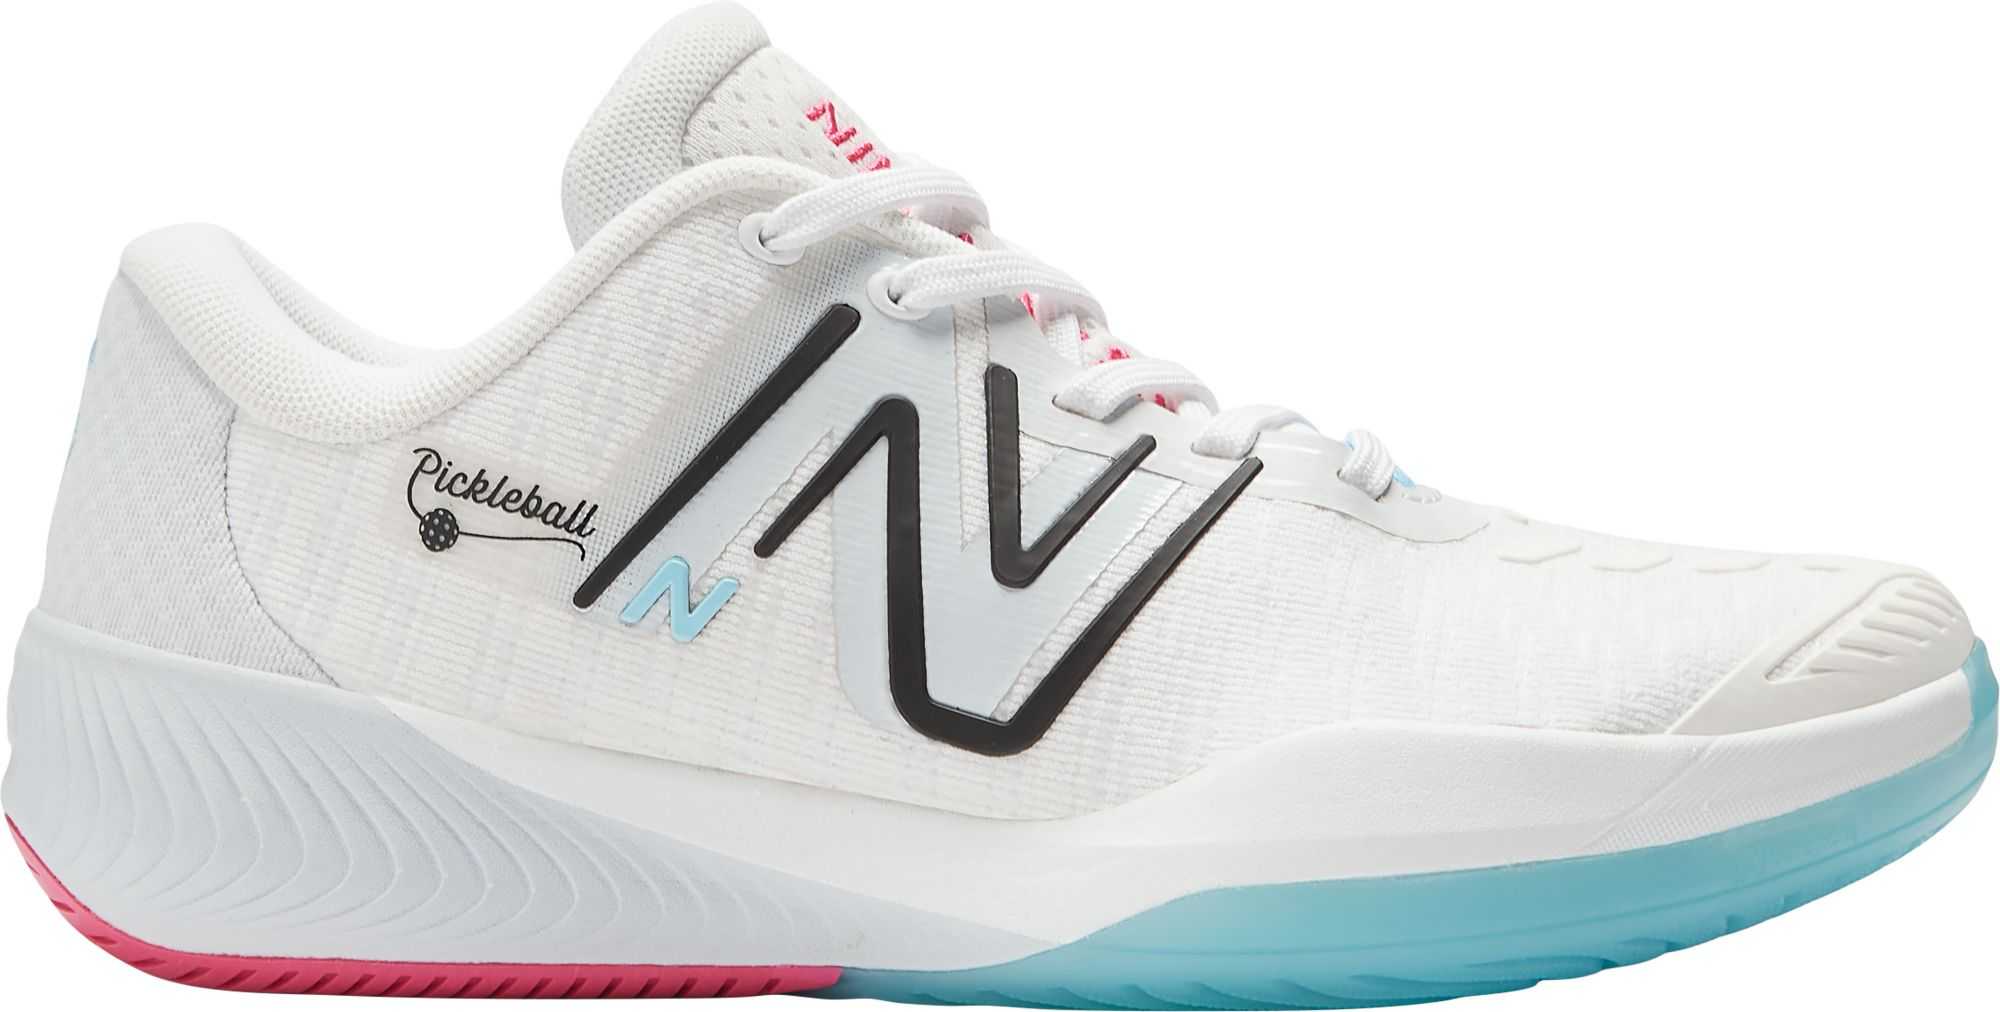 Best Pickleball Shoes for Women, Recommended by Pickleball Pros